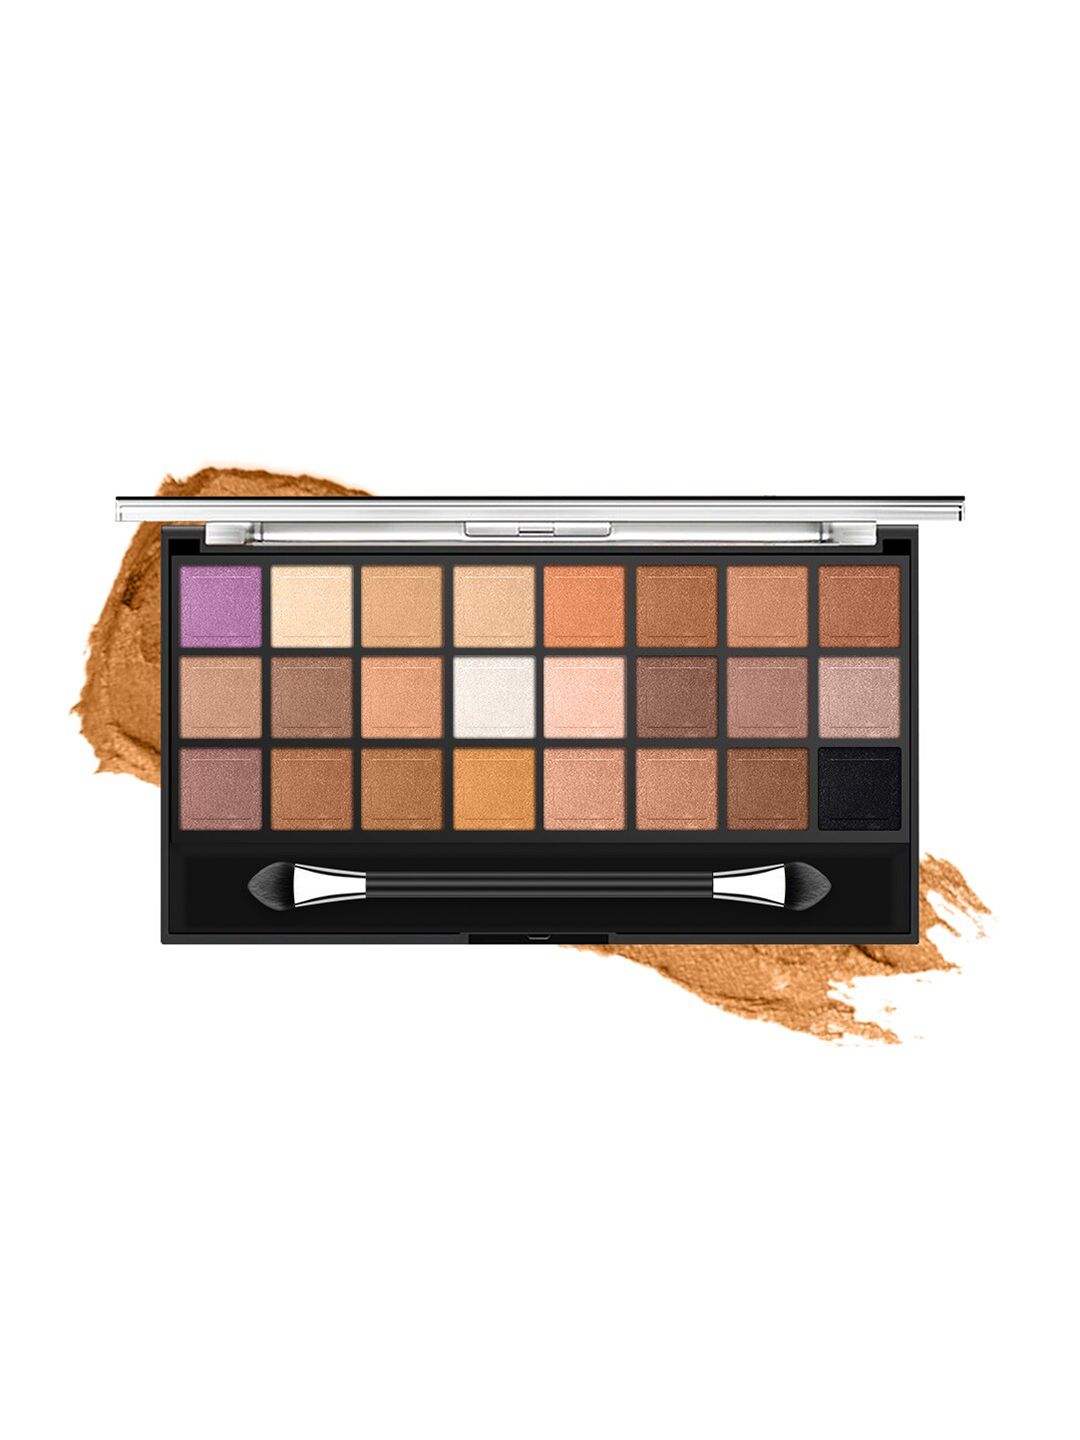 MISS ROSE 24 Color Matte Eyeshadow Palette 7001-071 NT01 Price in India